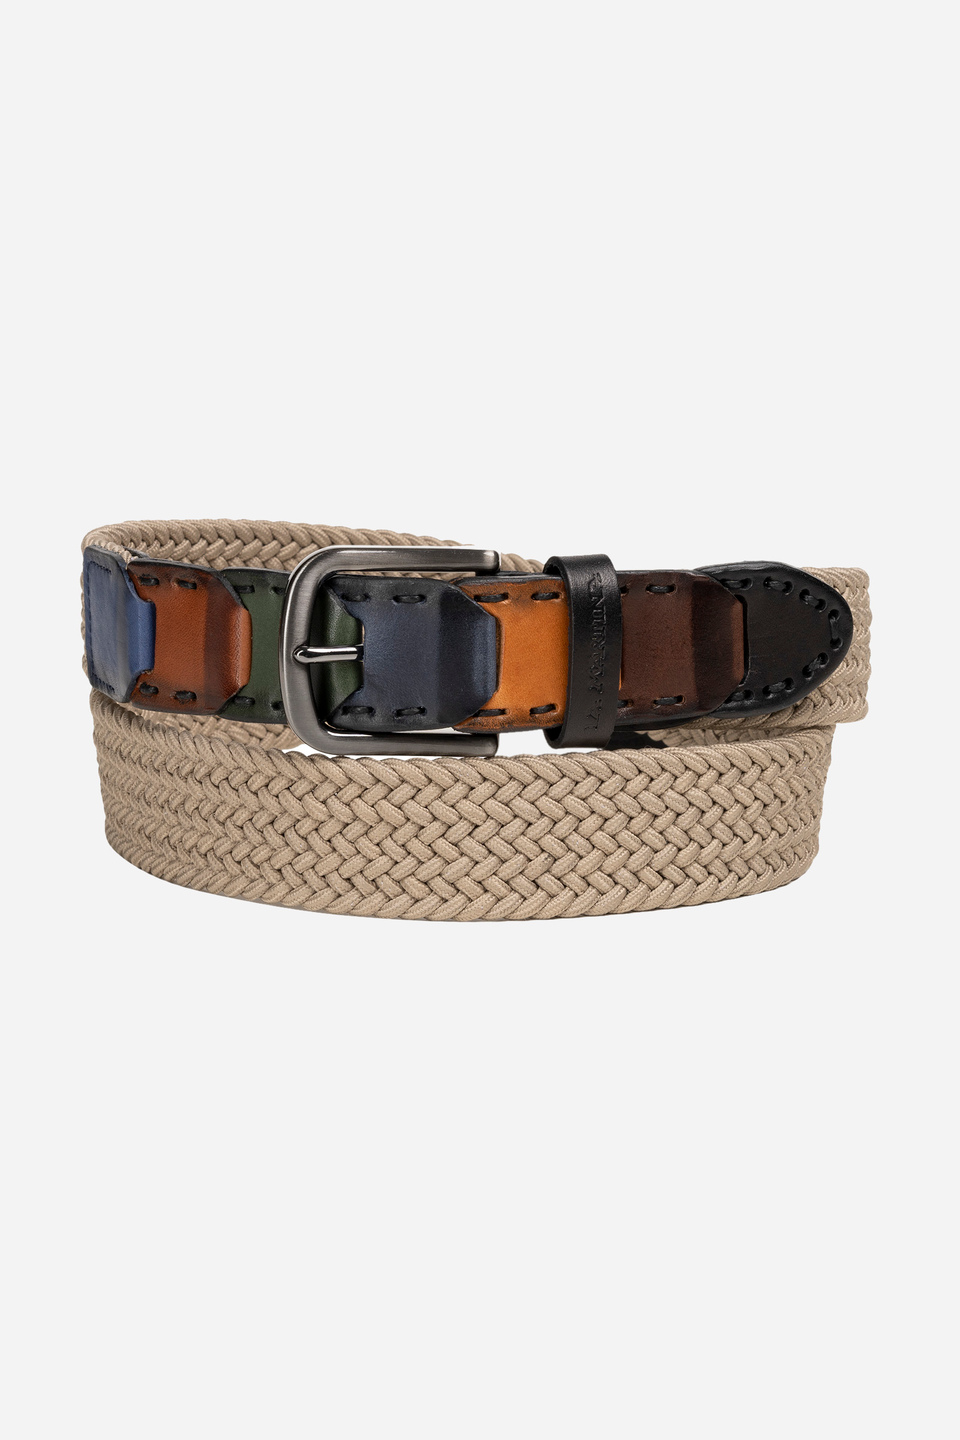 Men's belt in leather and fabric | La Martina - Official Online Shop